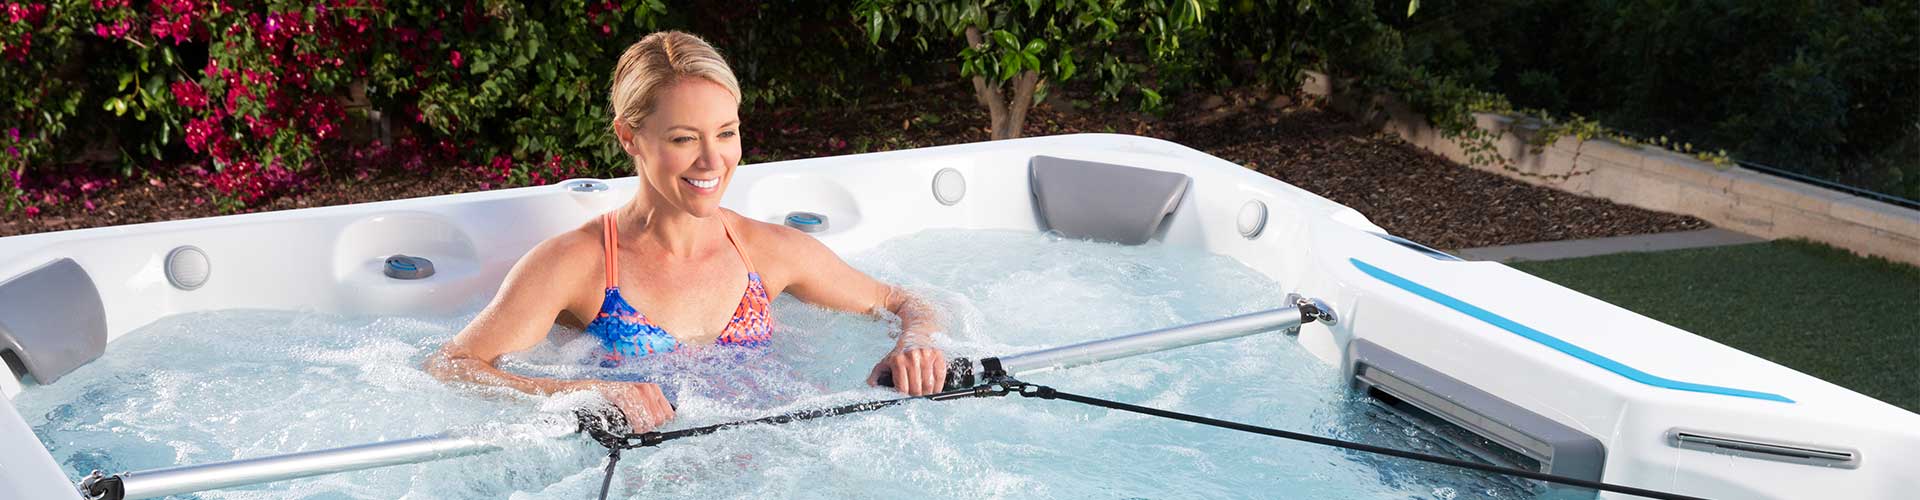 Swim Spa Dealer Pewaukee Shares 3 Ways to Use a Lap Pool at Home